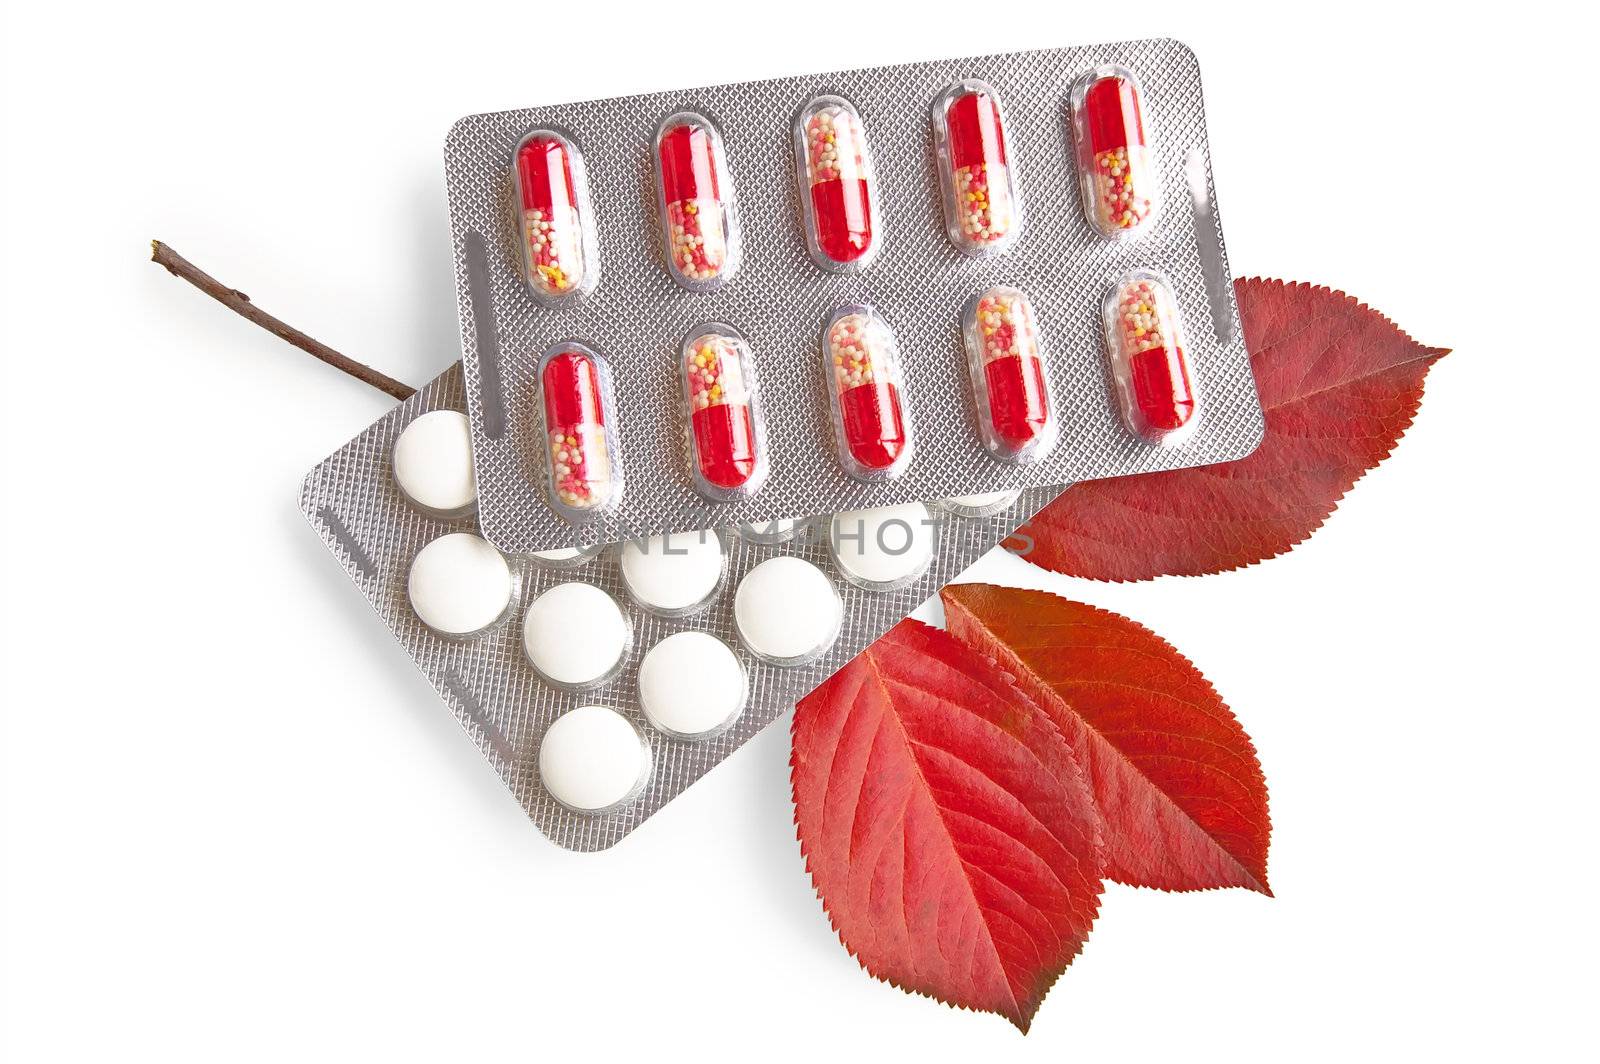 White round pill, red capsules in packs, with a sprig of red leaves irgi isolated on a white background